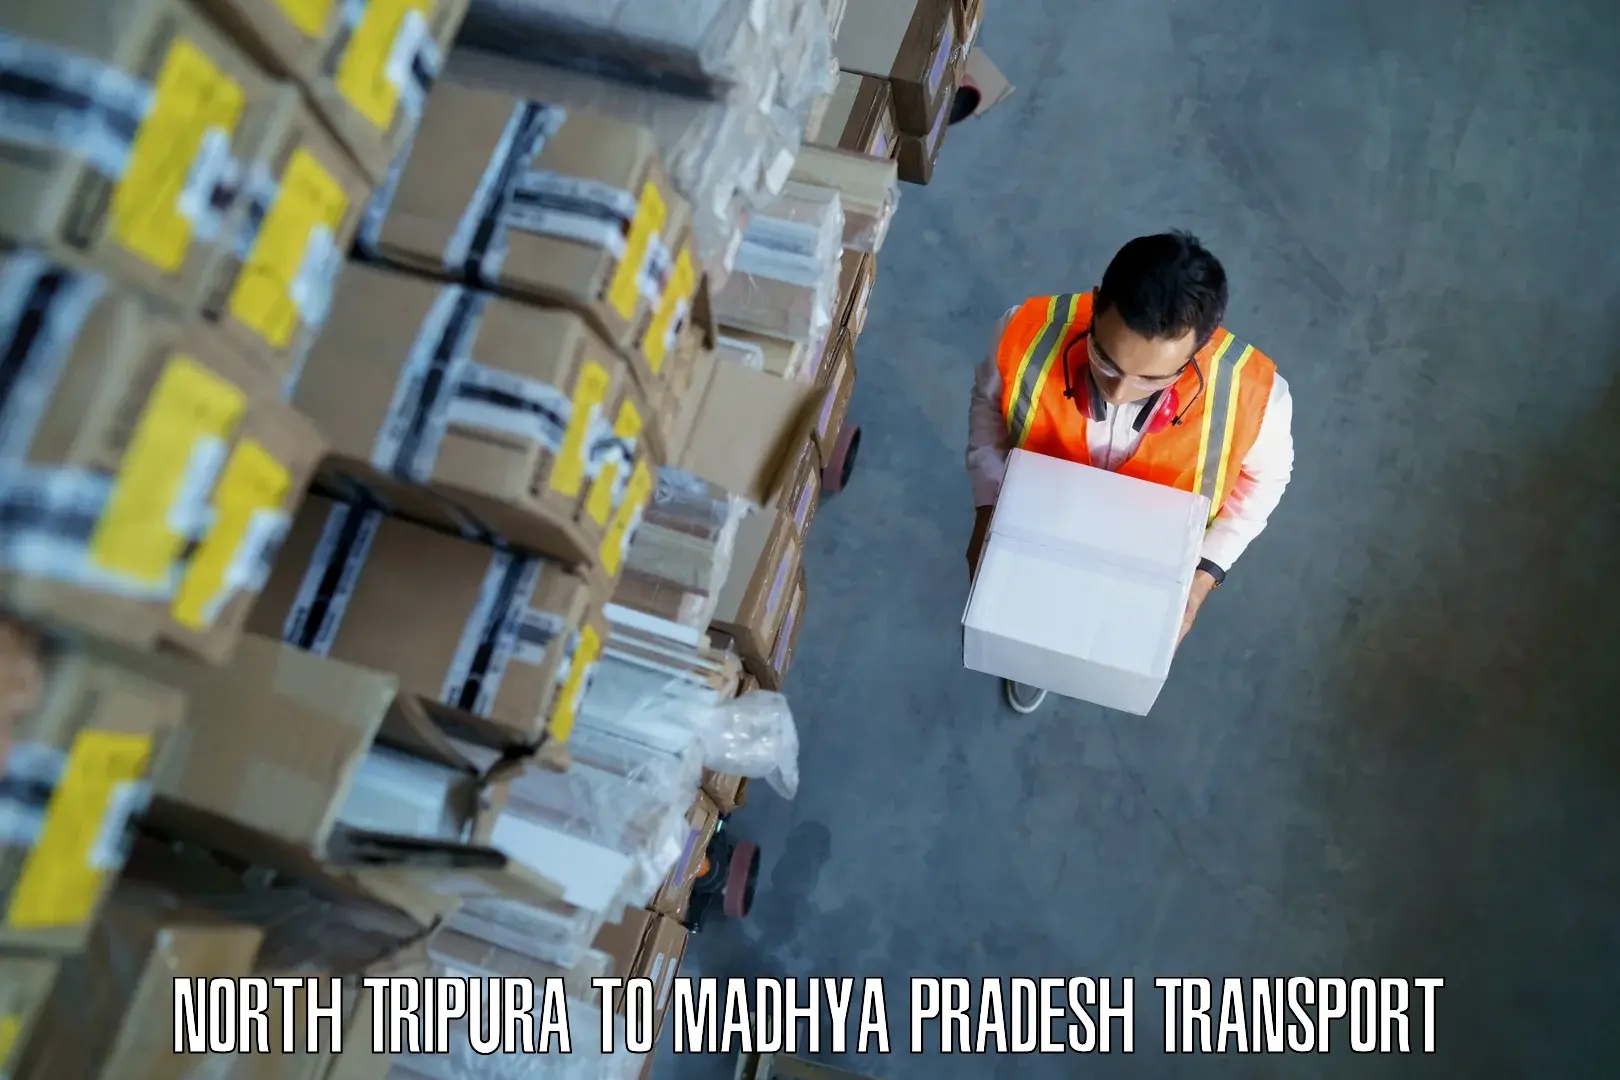 Air freight transport services North Tripura to Harda